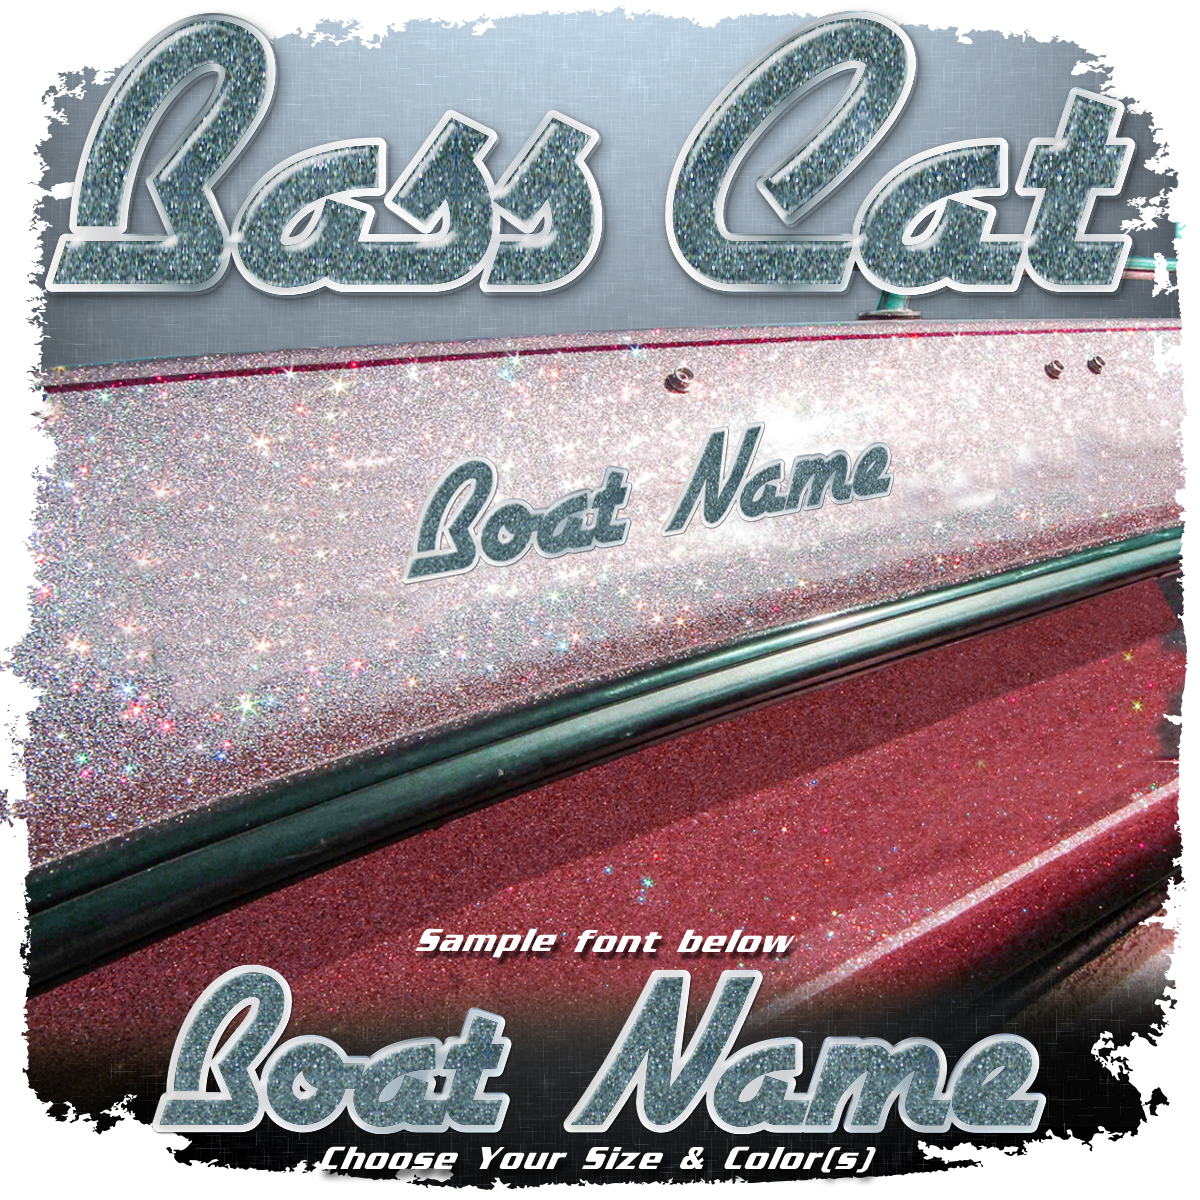 Domed Boat Name in the Bass Cat Font